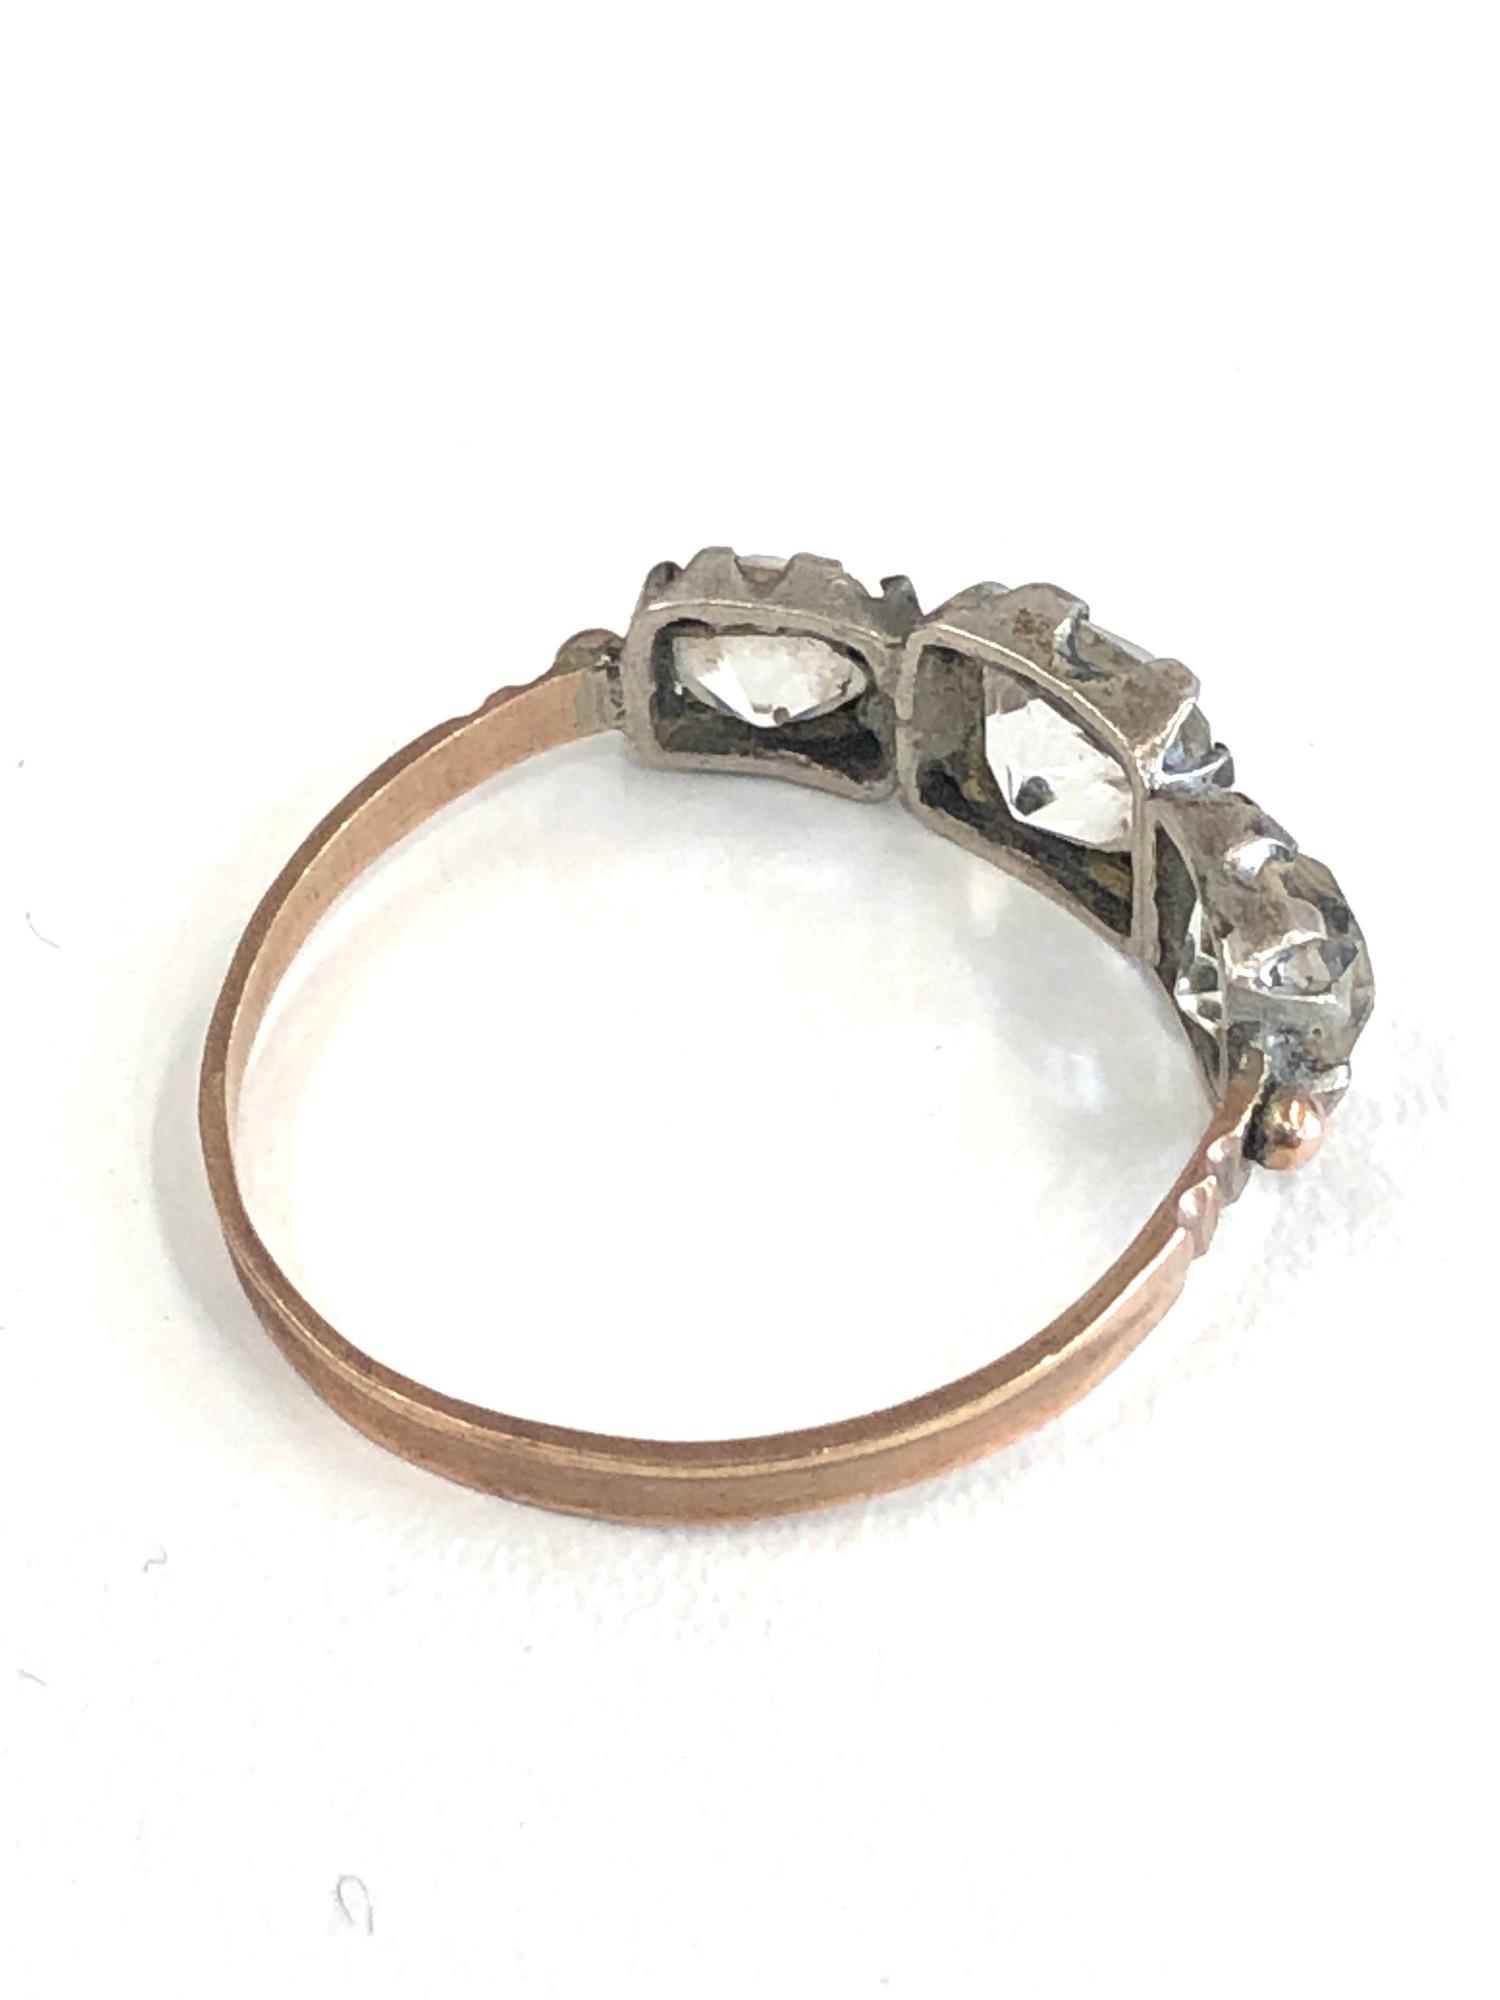 Early victorian or Georgian 9ct gold and silver paste ring - Image 3 of 3